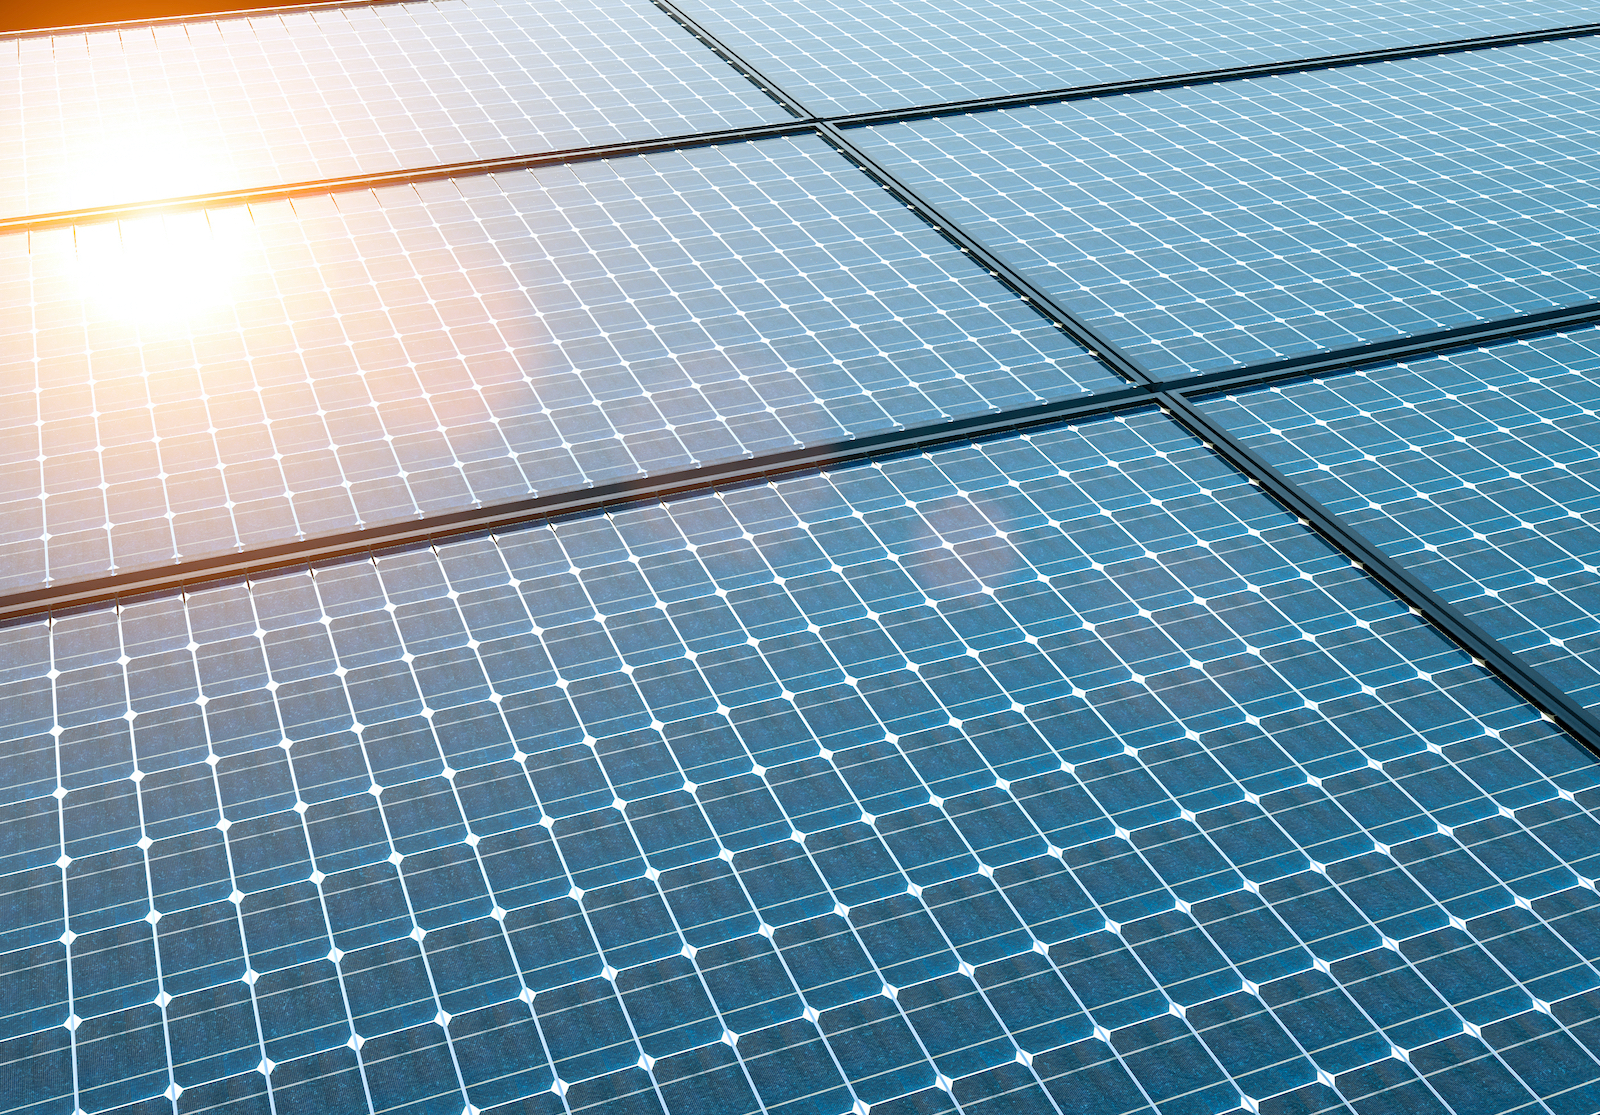 ITO solar cells contribute to efficient light transmittance and electrical conductivity